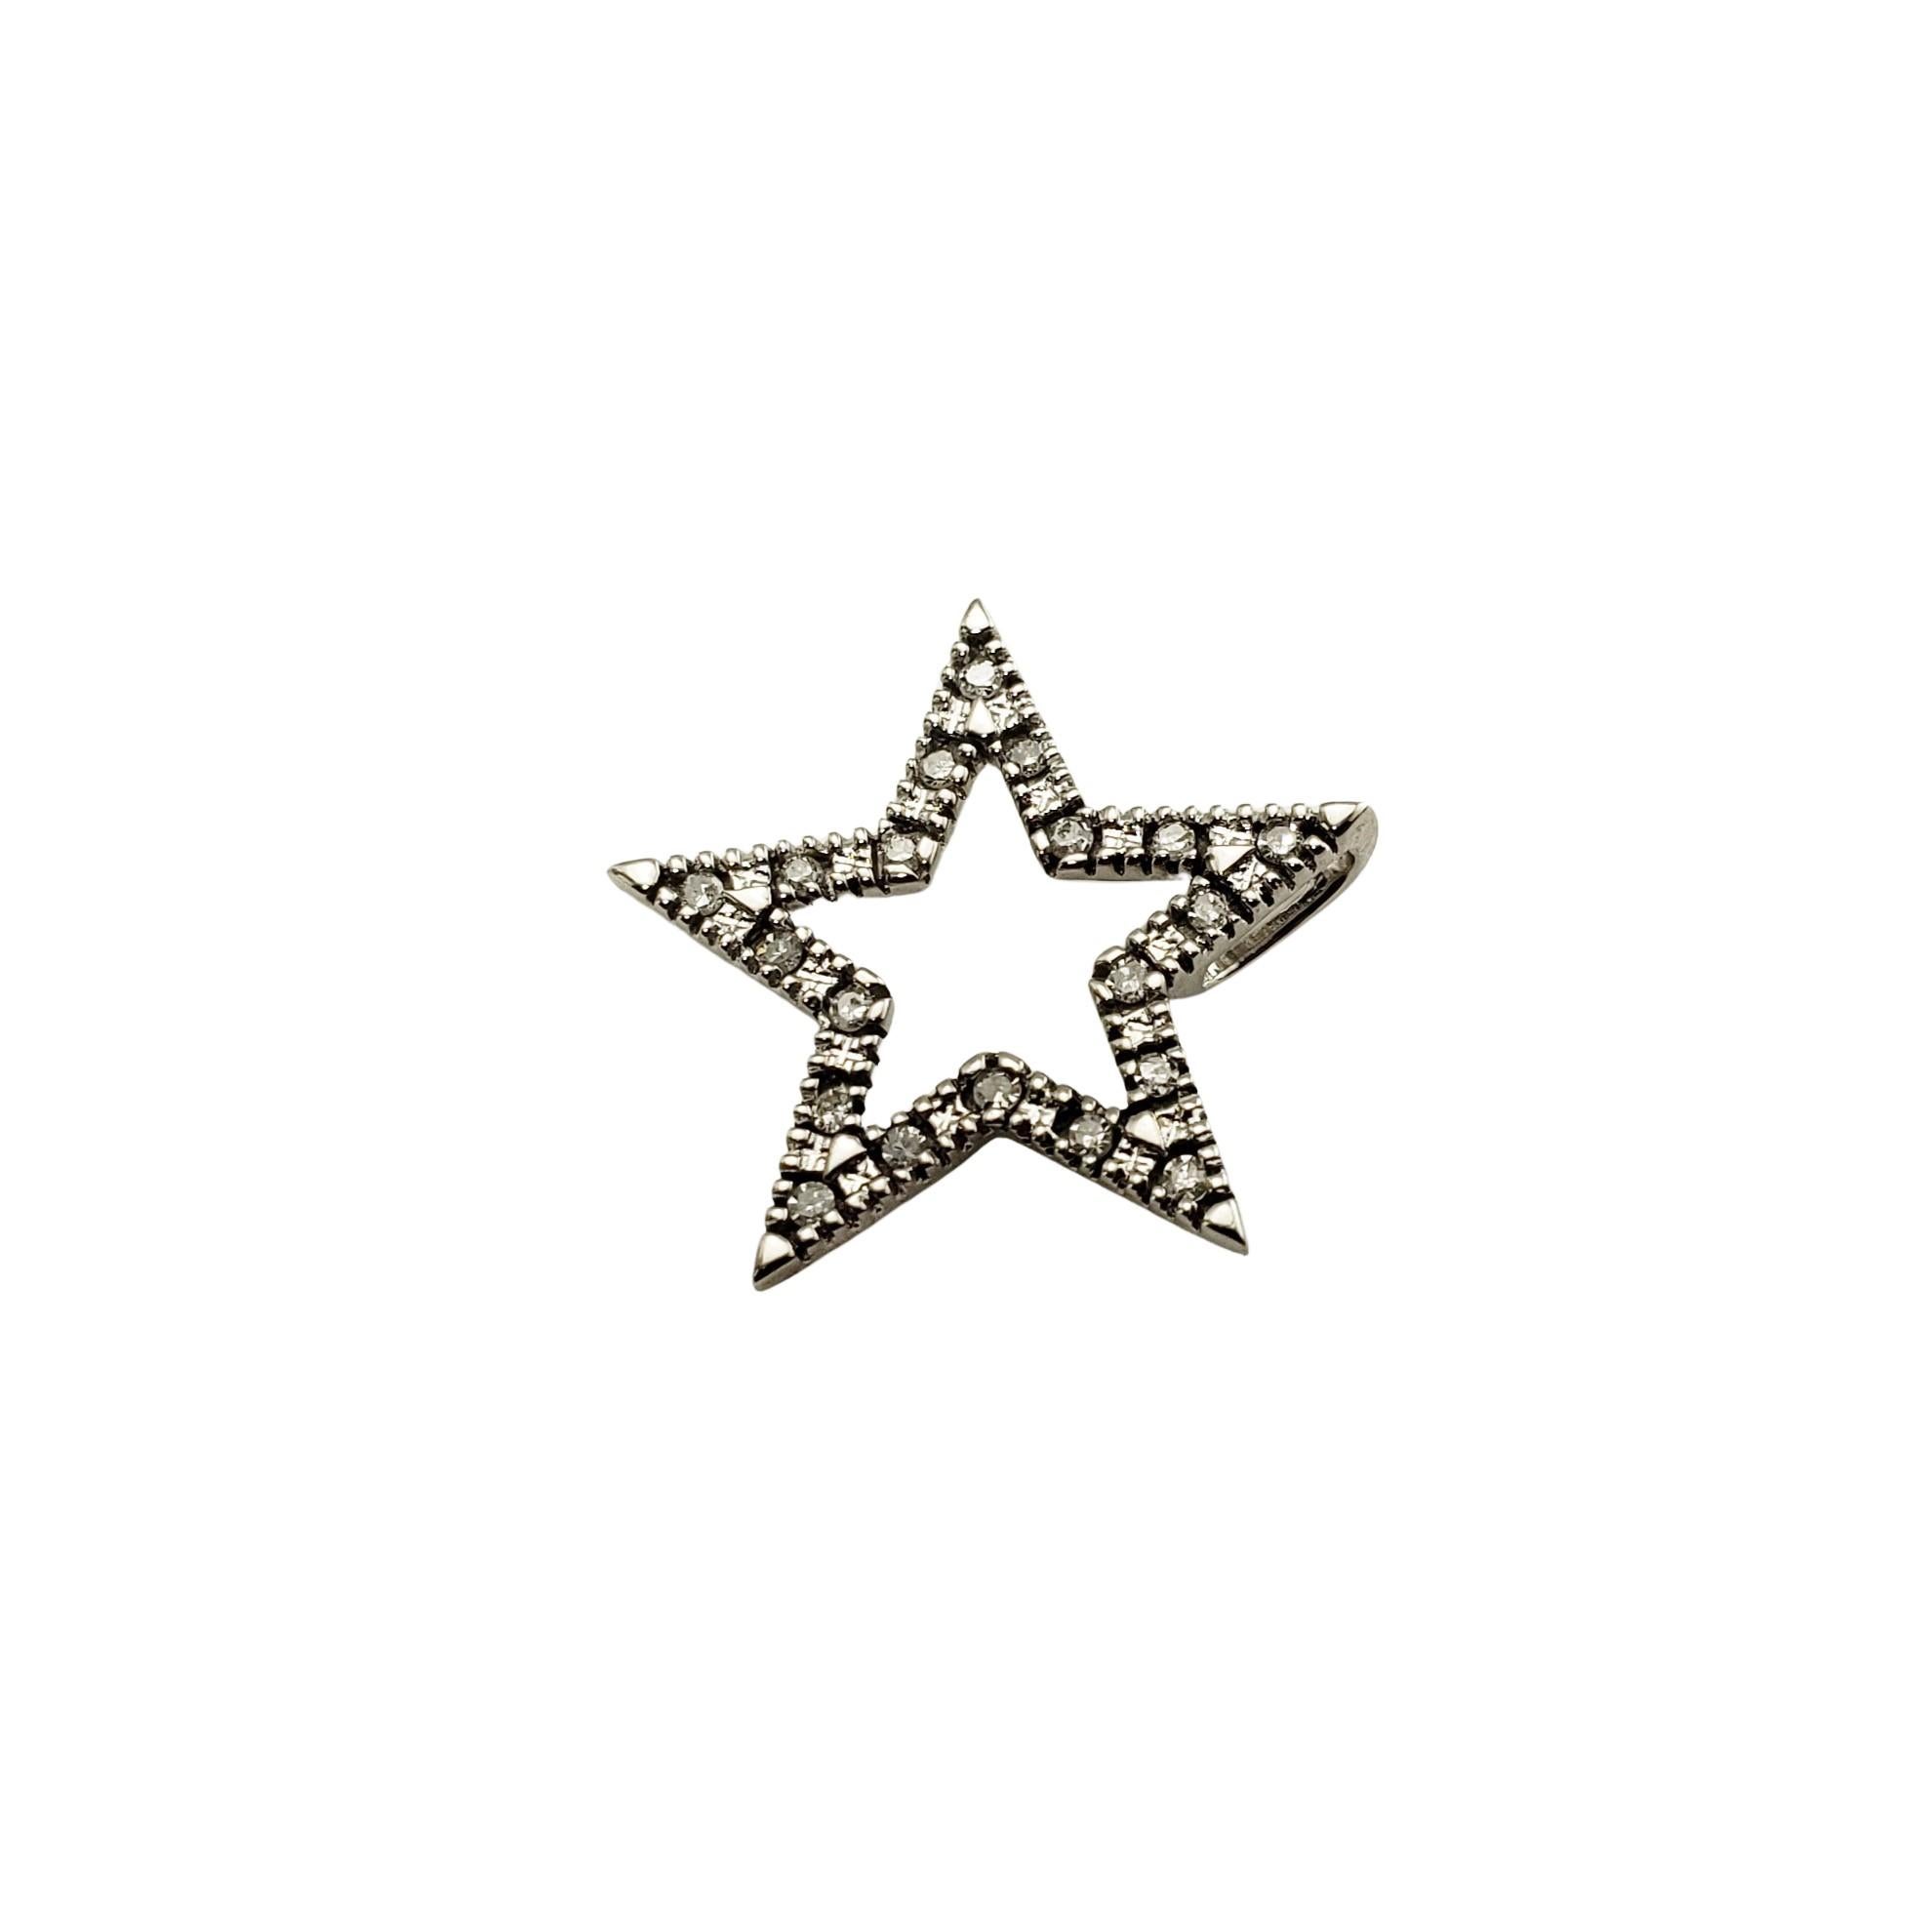 Vintage 10 Karat White Gold Diamond Star Pendant-

This sparkling star pendant features 20 round single cut diamonds set in classic 10K white gold.

*Chain not included.

Approximate total diamond weight:  .10 ct.

Diamond color: J-K

Diamond